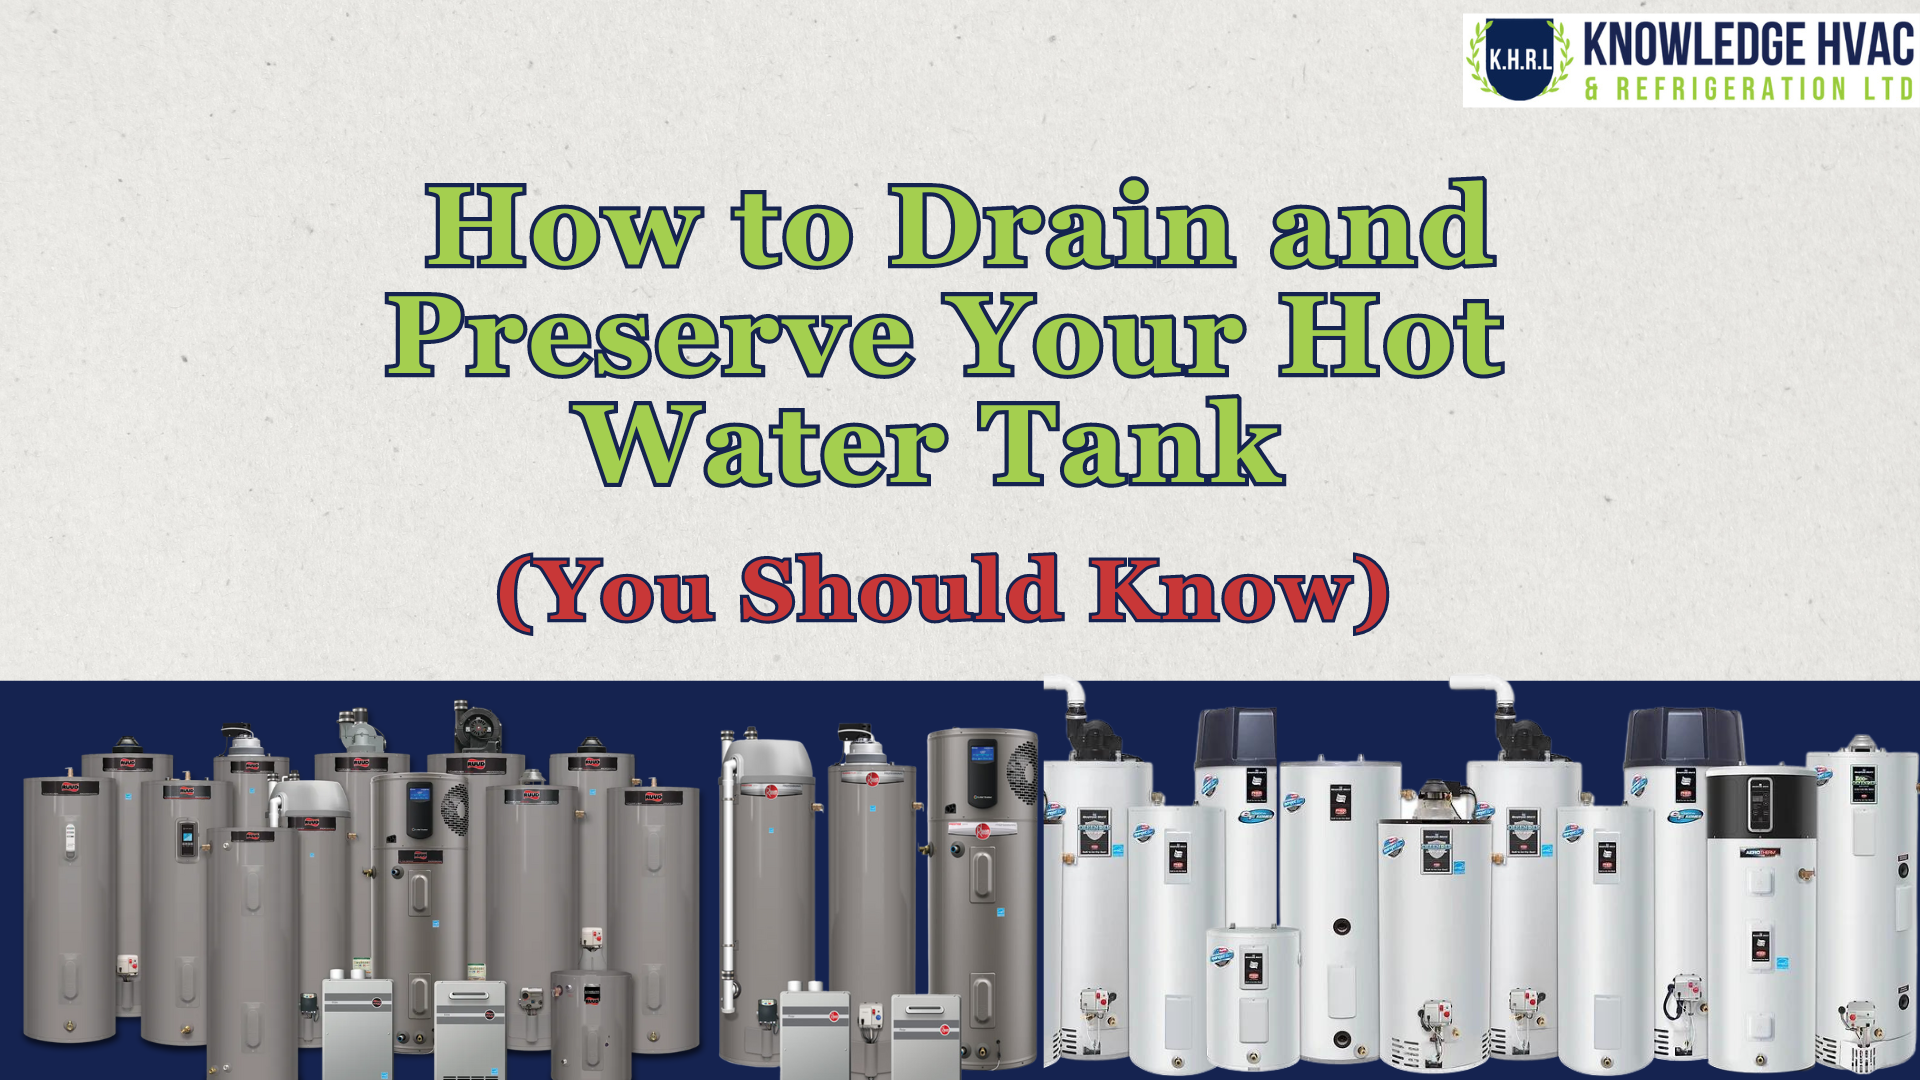 How to Drain and Preserve Your Hot Water Tank